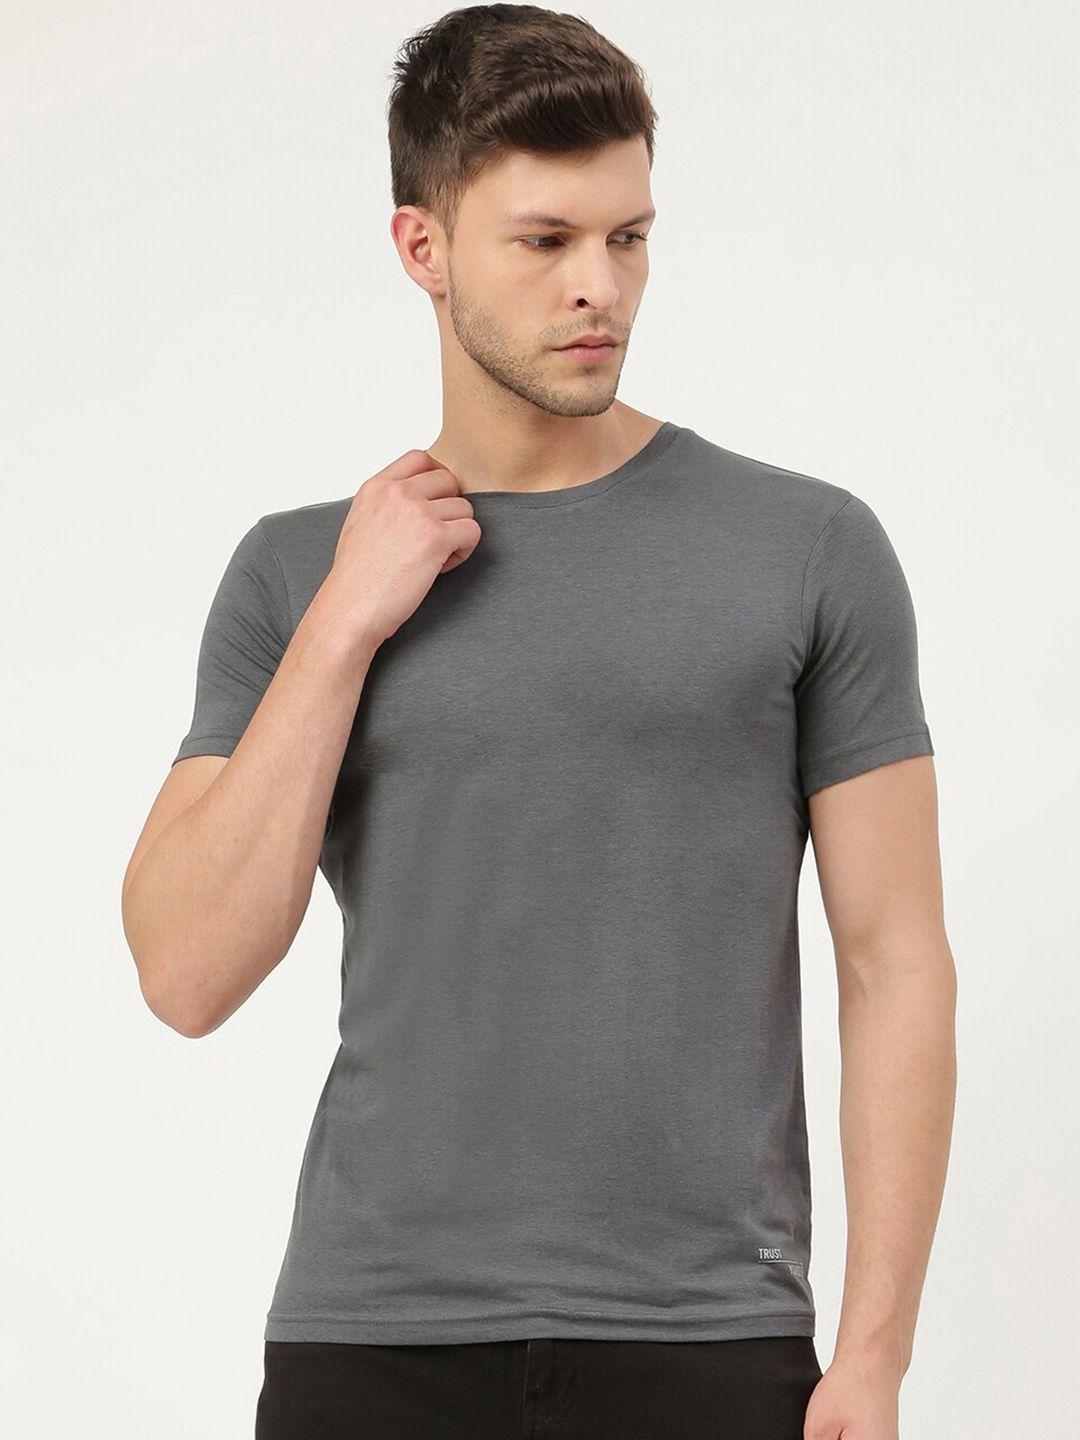 freecultr men charcoal bamboo antimicrobial applique t-shirt